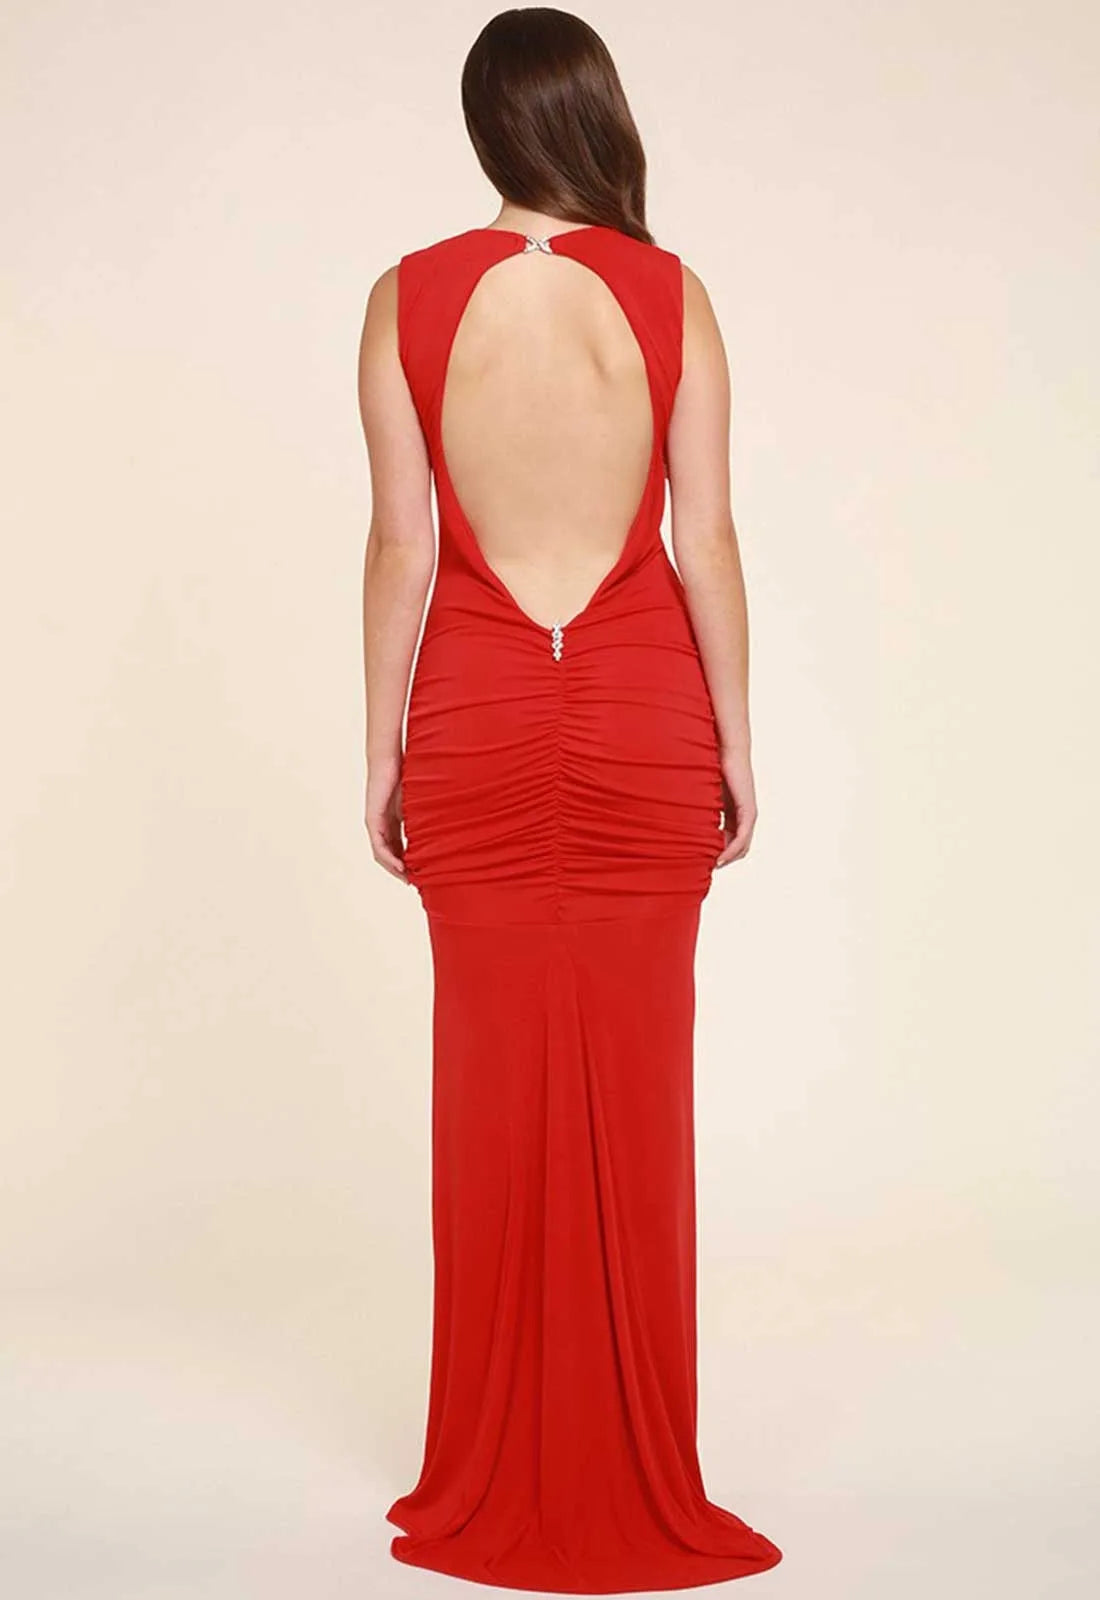 Honor Gold Bella Sleeveless Maxi Dress in Red-21775